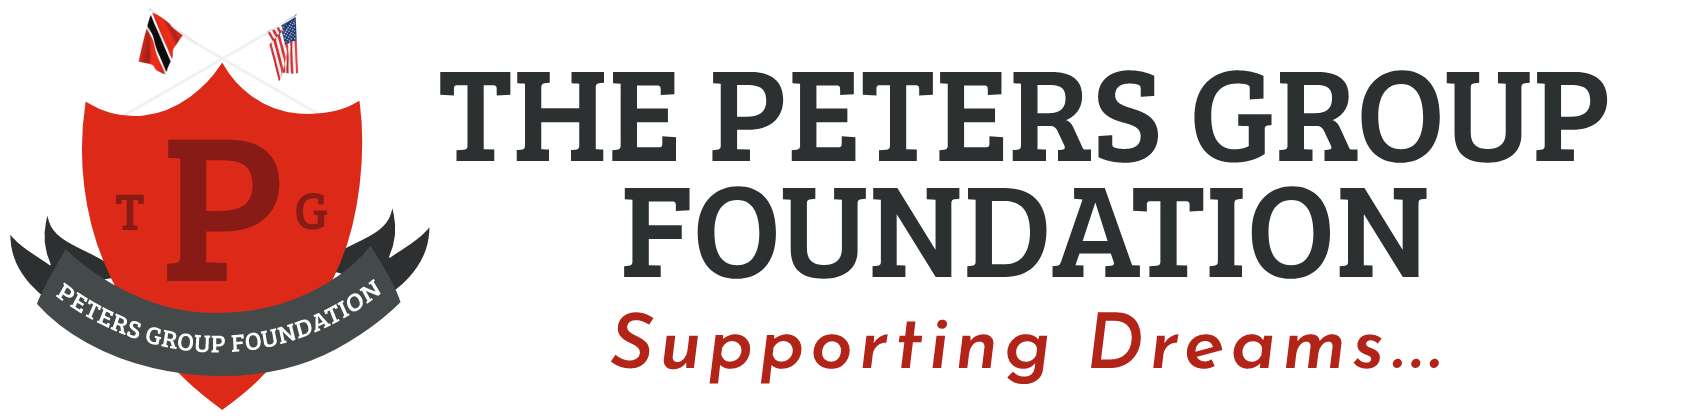 Peters Group Foundation Logo